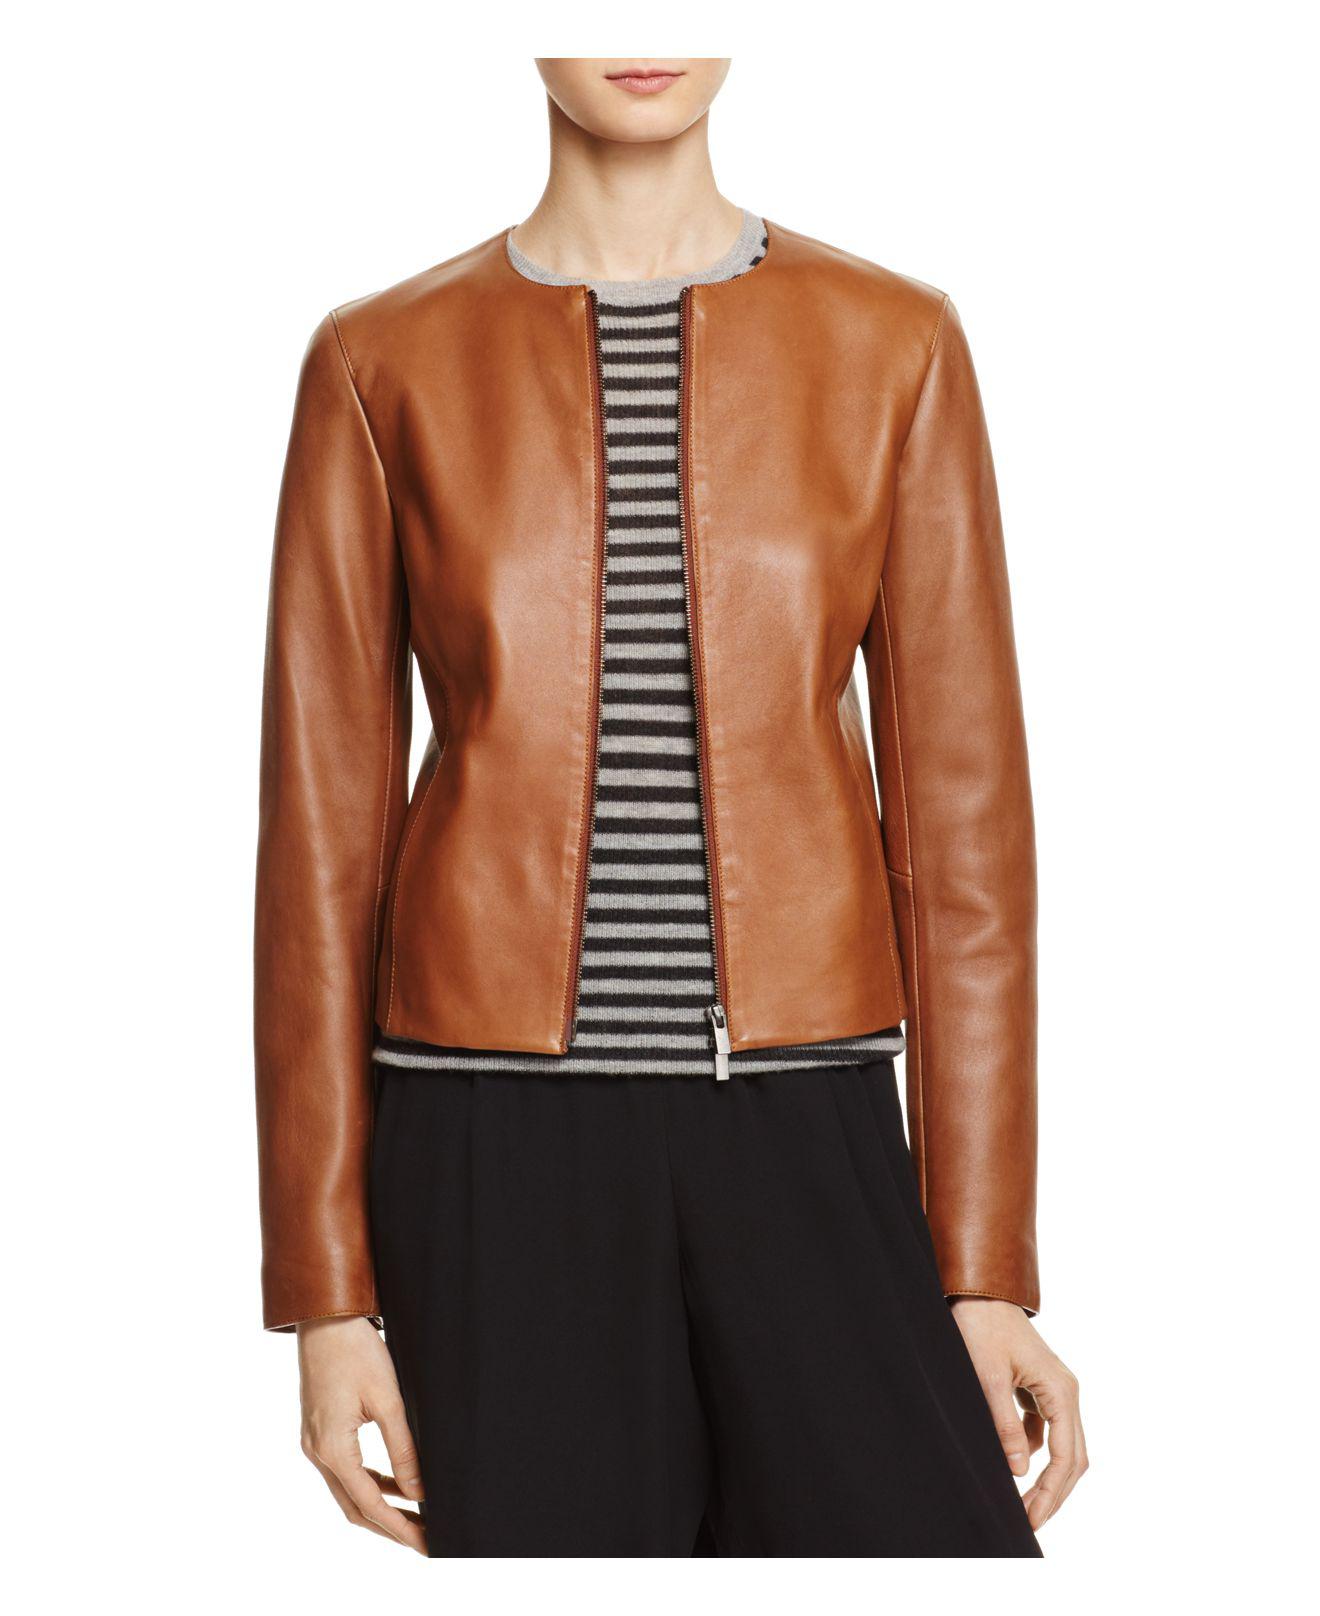 Lyst - Vince Leather Jacket in Brown